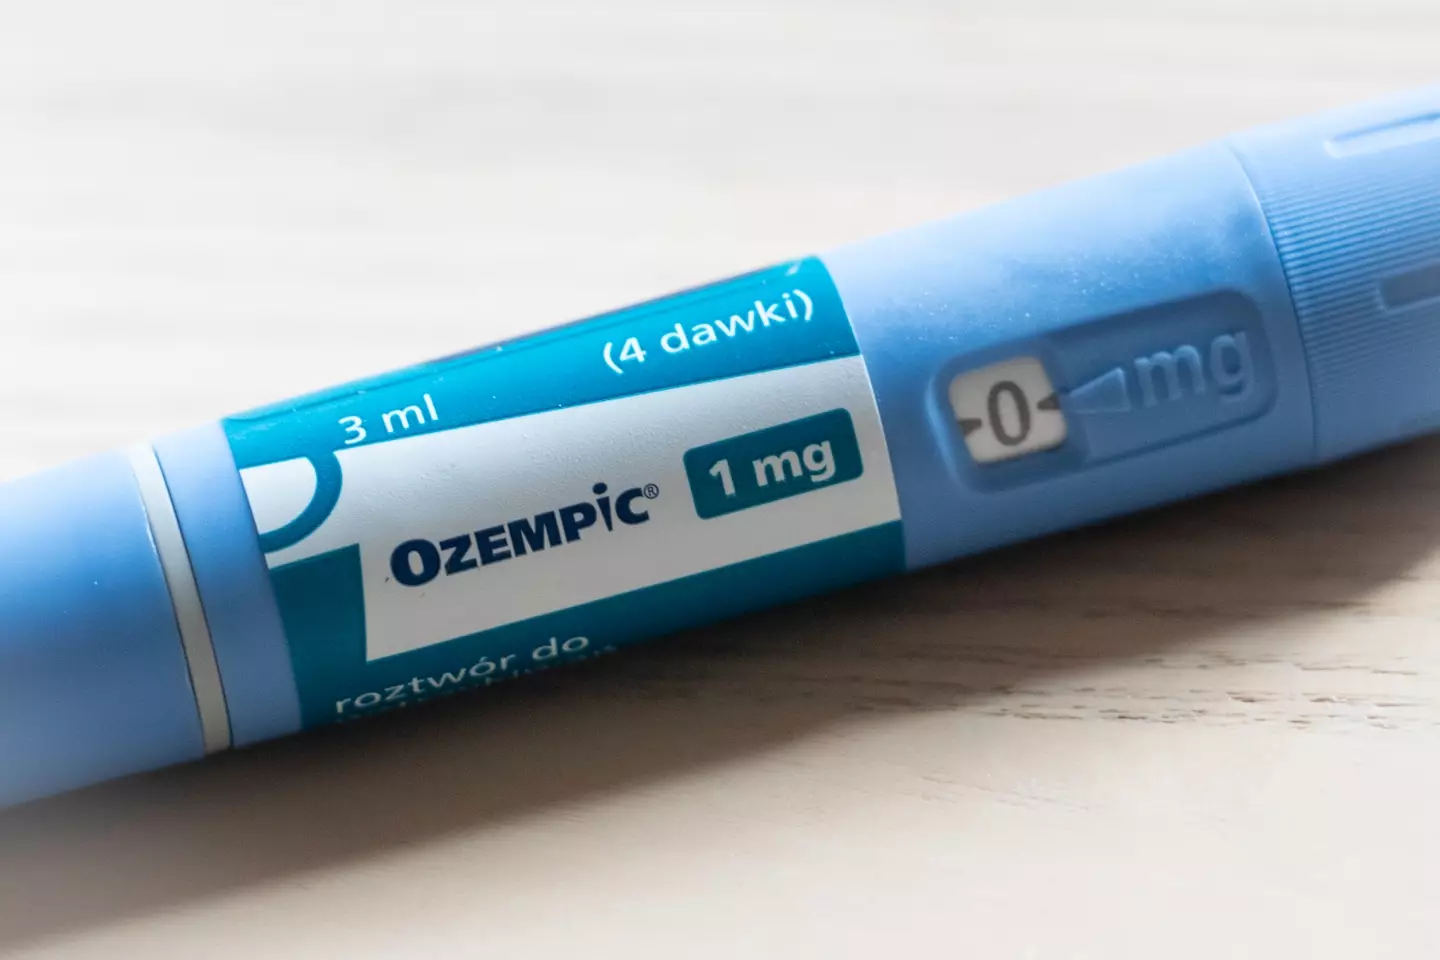 Ozempic was created to help those with type 2 diabetes.